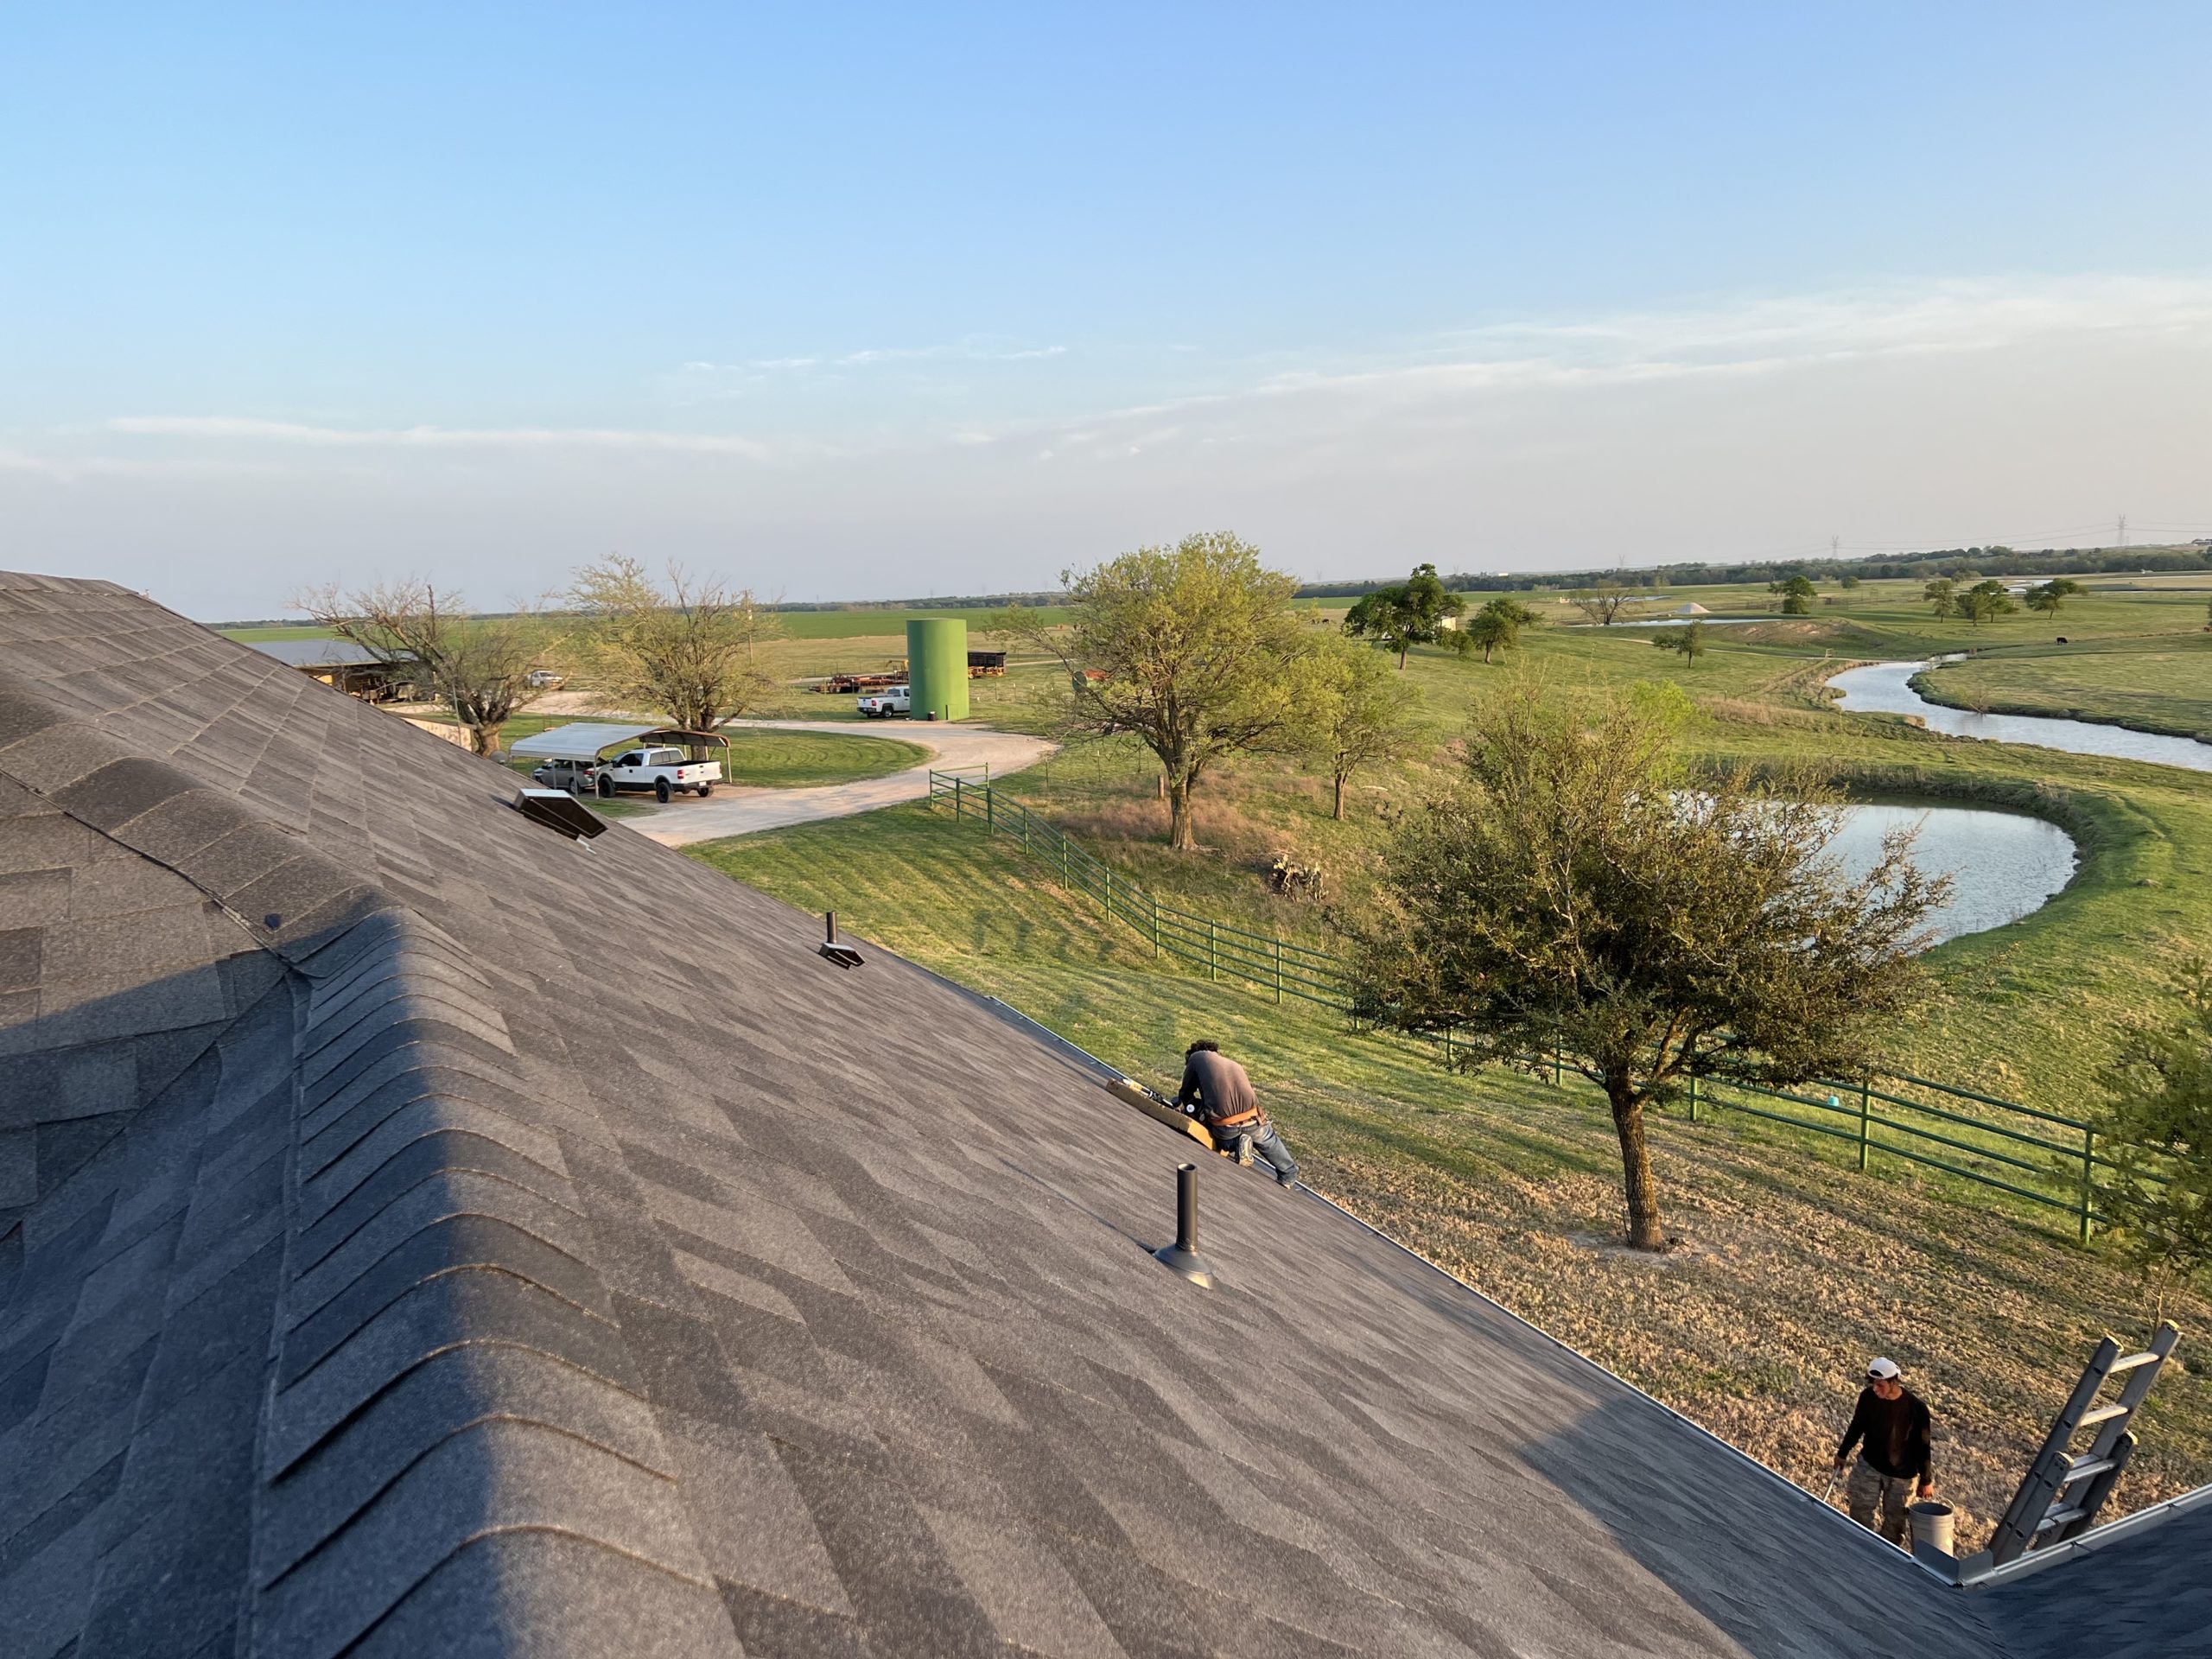 Central Texas Roof repair ed by Whitish Roofing